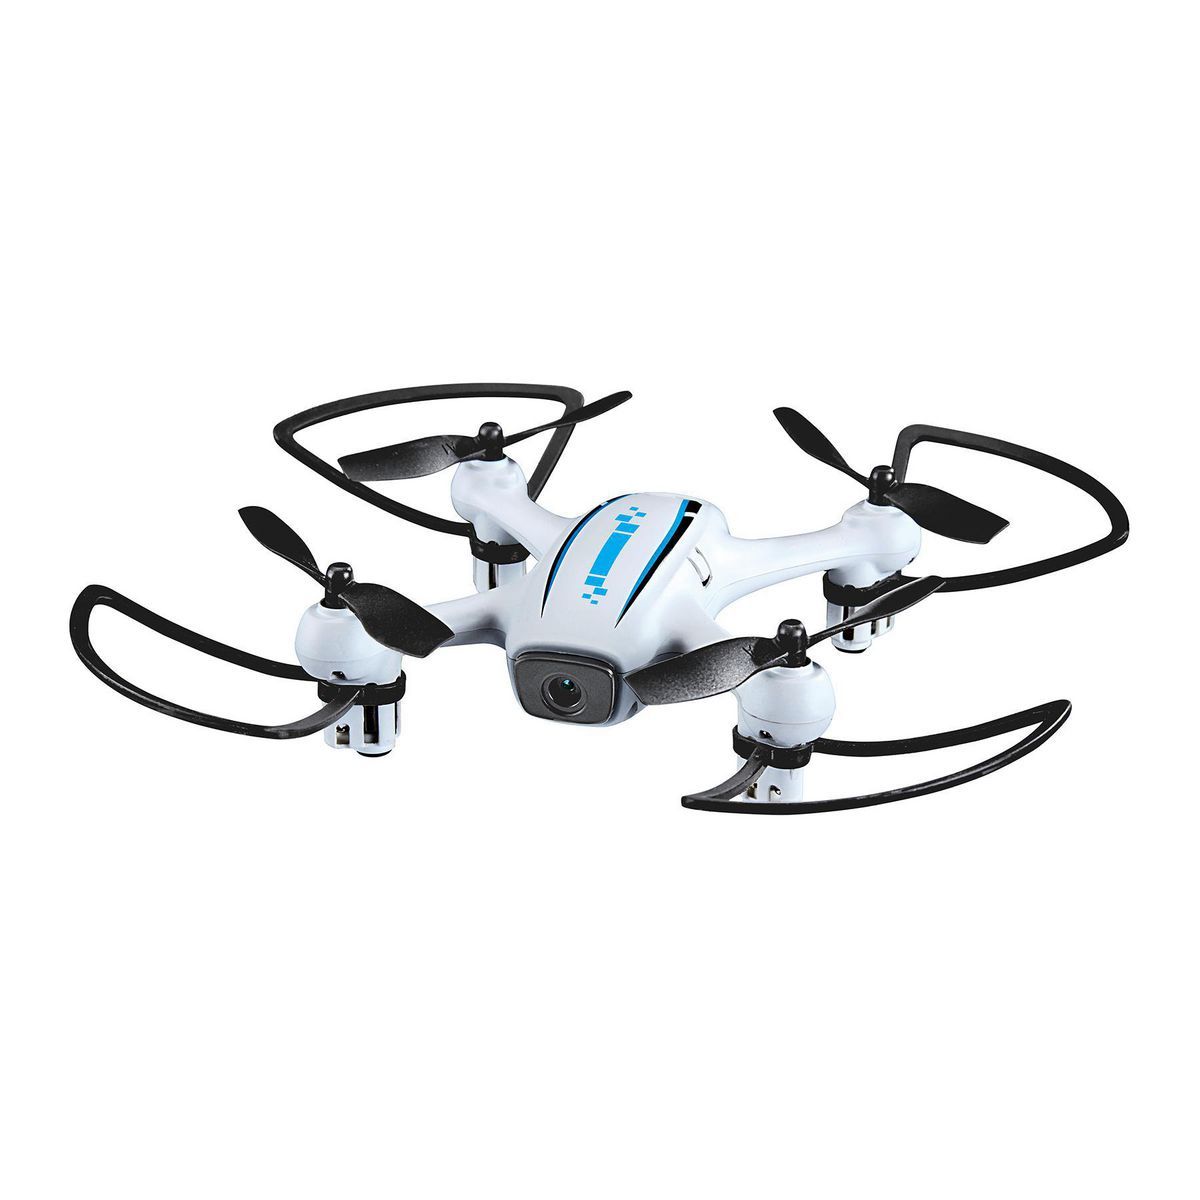 High Performance Drone with 480p Camera/Video